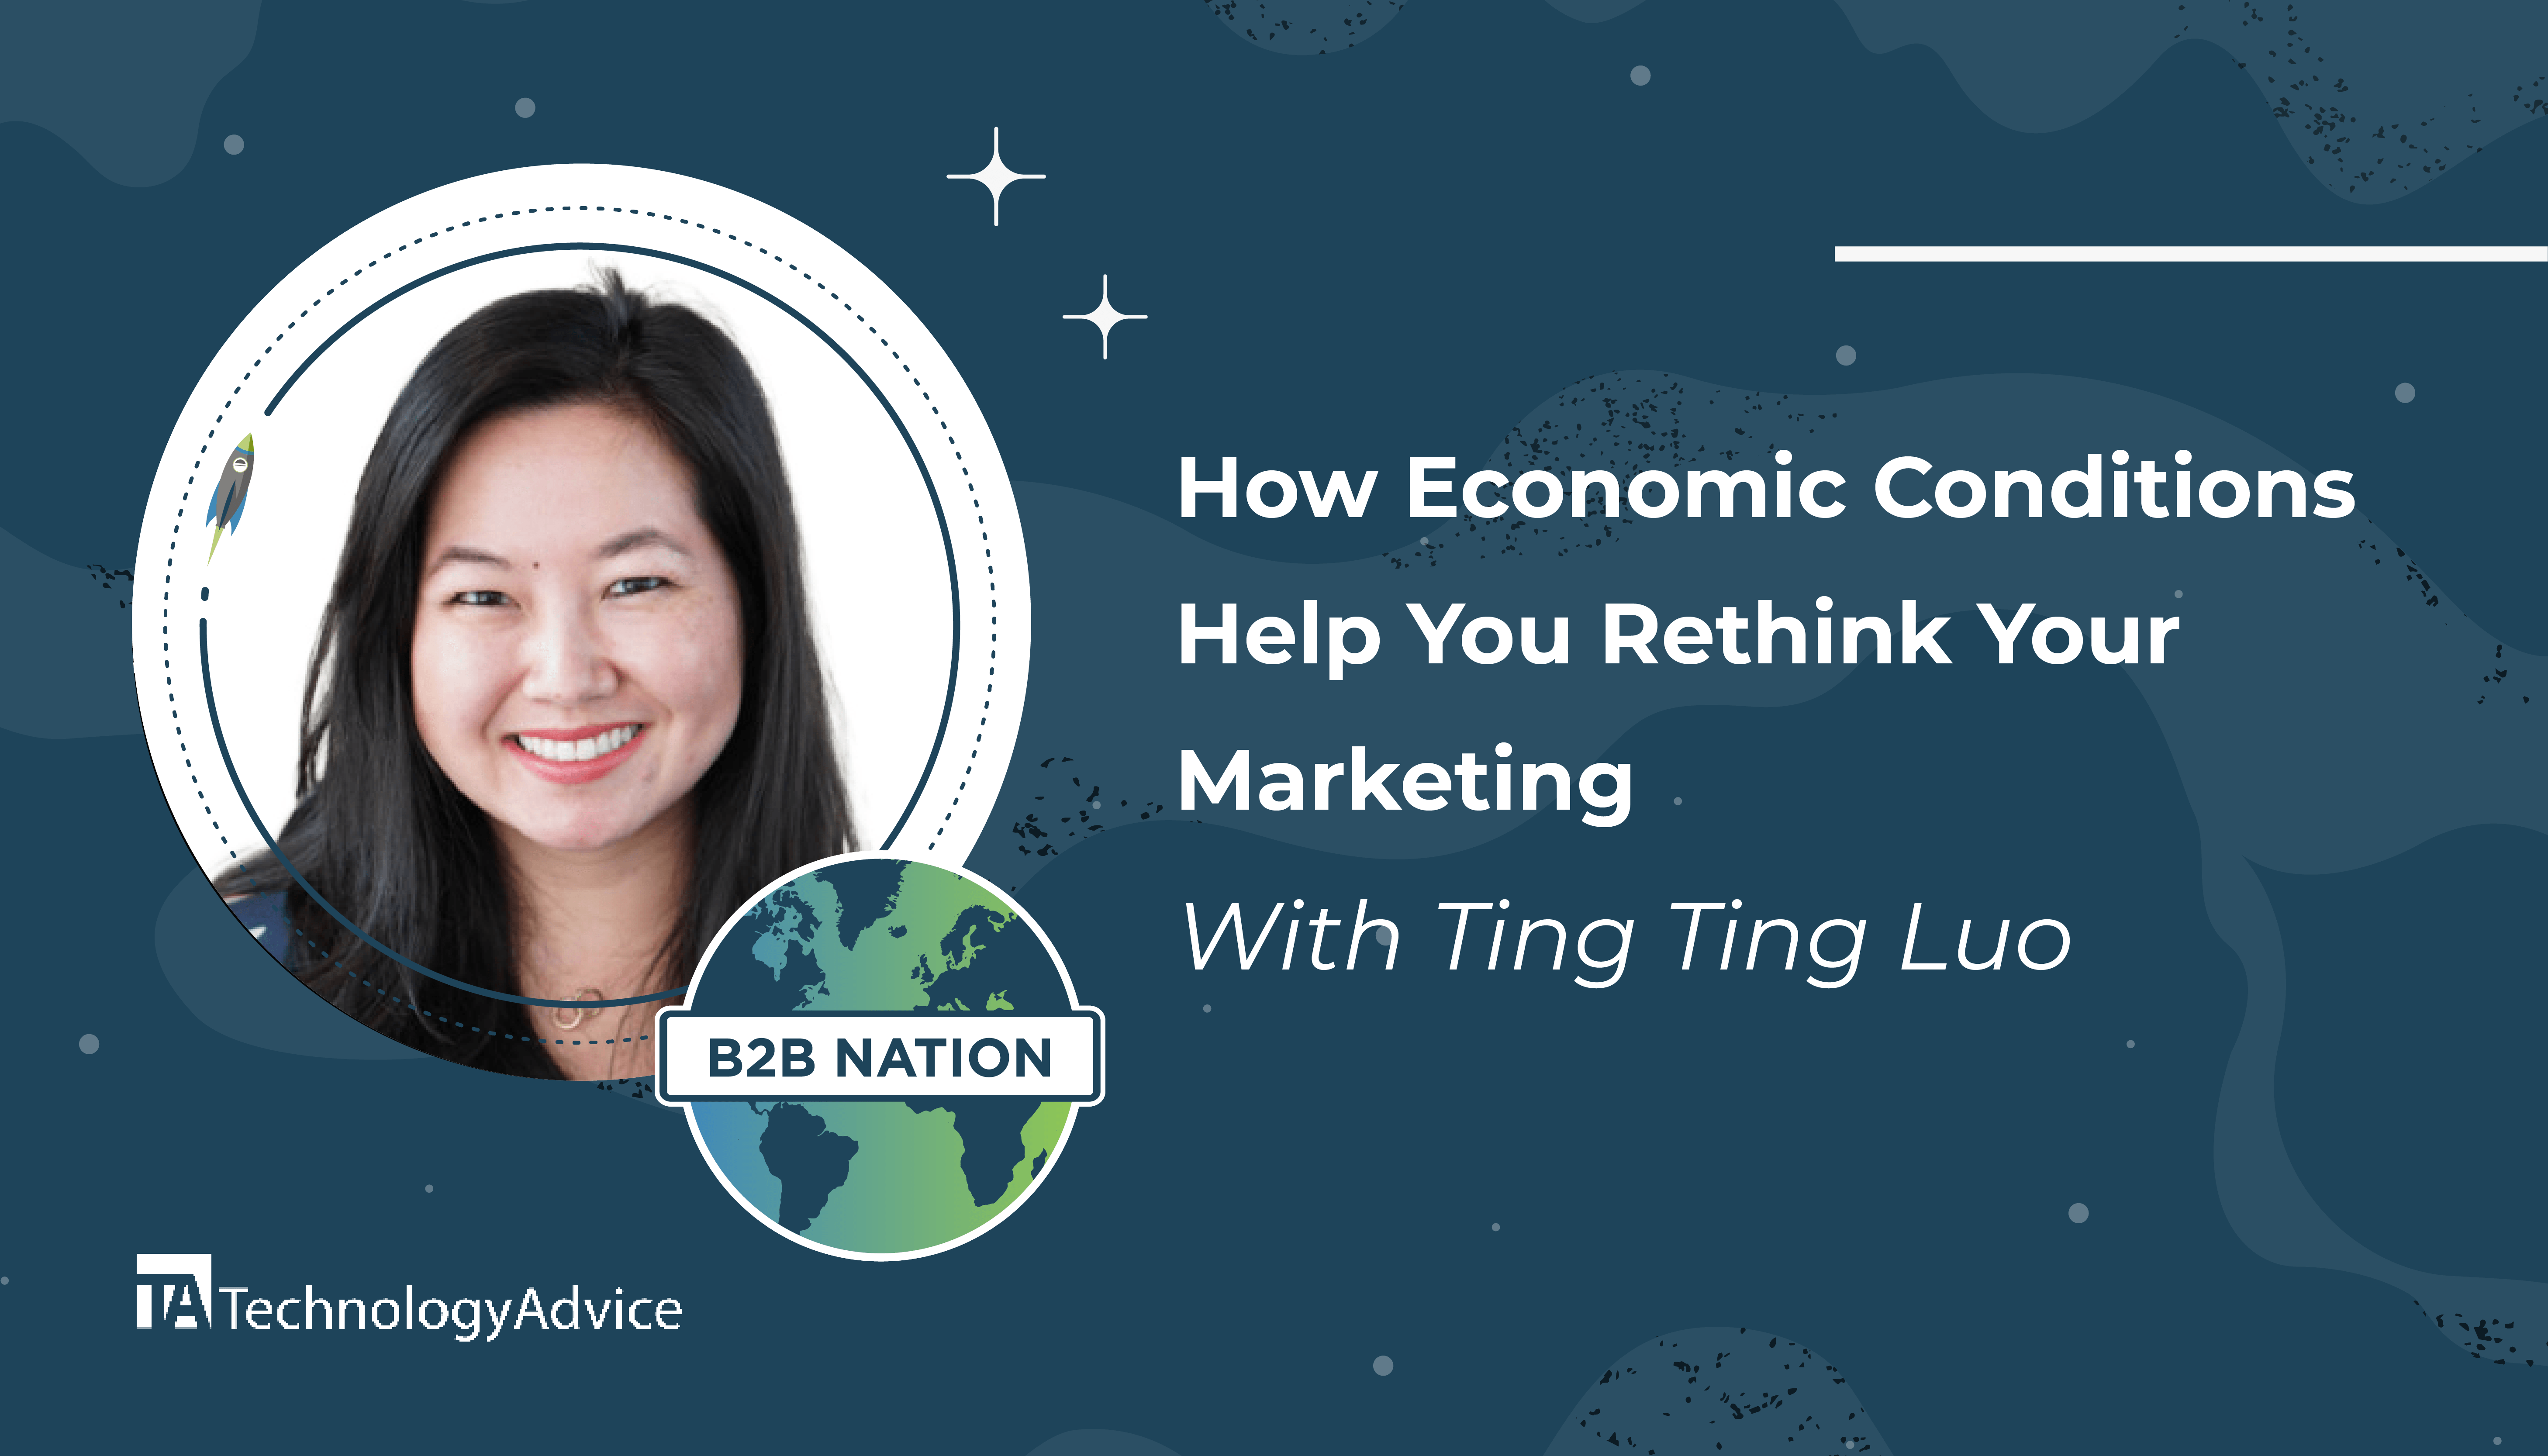 How Economic Conditions Help You Rethink Your Marketing